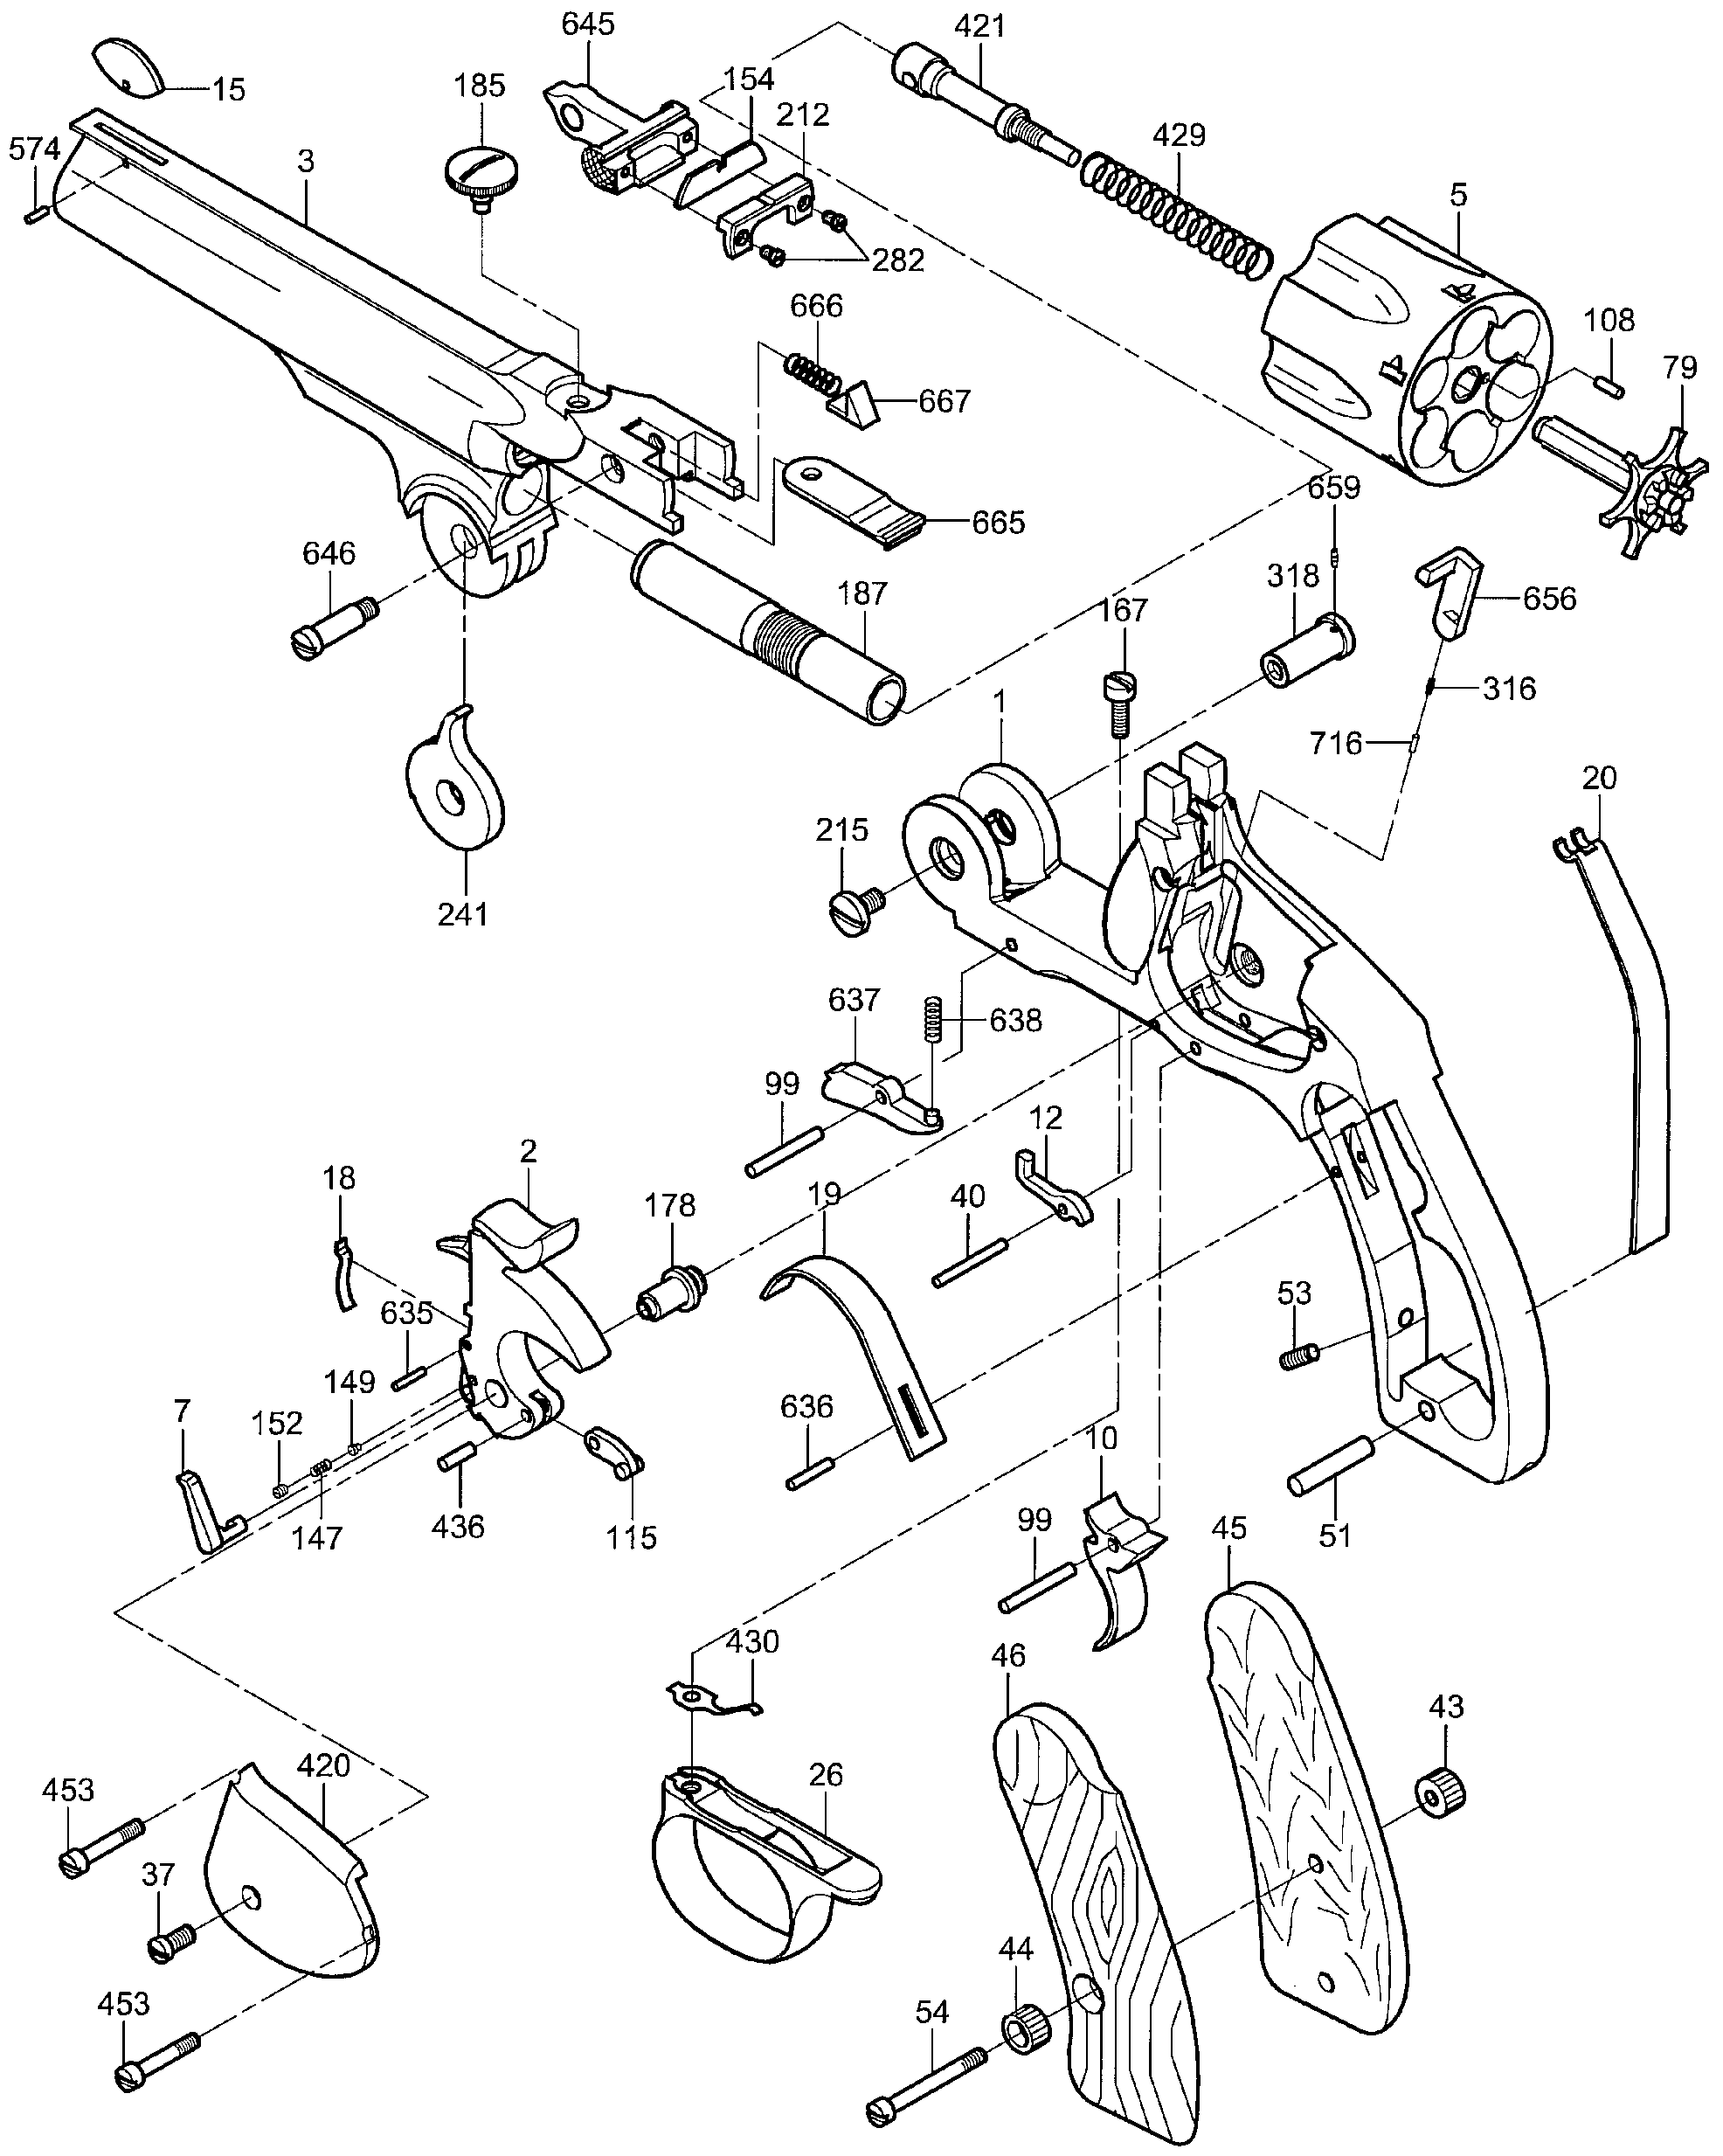 Smith And Wesson Model 10 Parts Diagram Lasoparesults